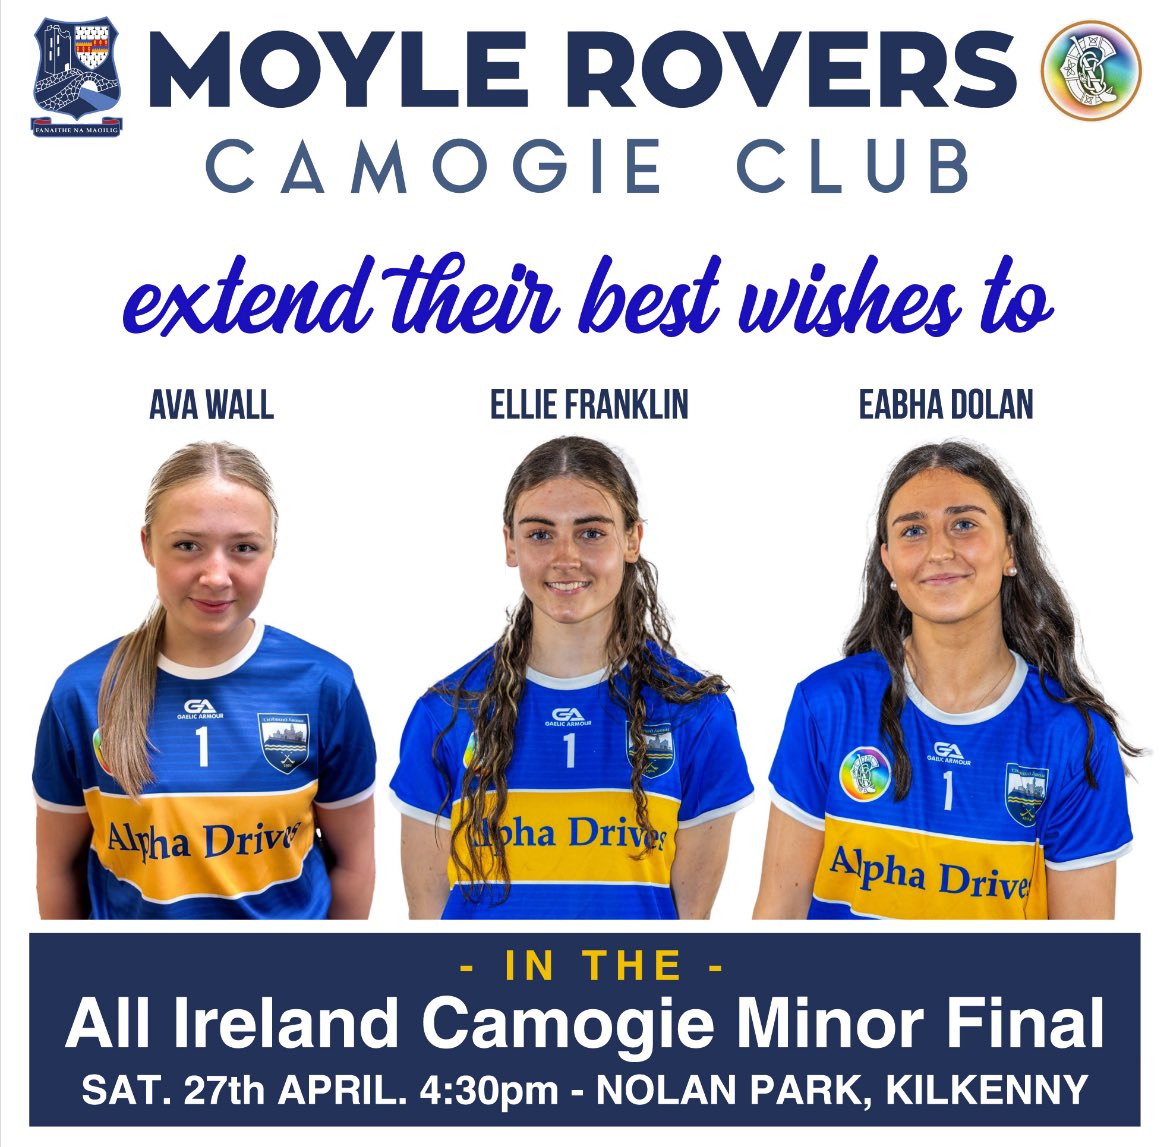 Very best wishes to the Minor Camogie panel, the team management and all involved especially our girls Ellie, Eabha and Ava in tomorrow’s All Ireland Camogie Minor A Final against Waterford. 🤞🤞🩵💙 Get your tickets online.